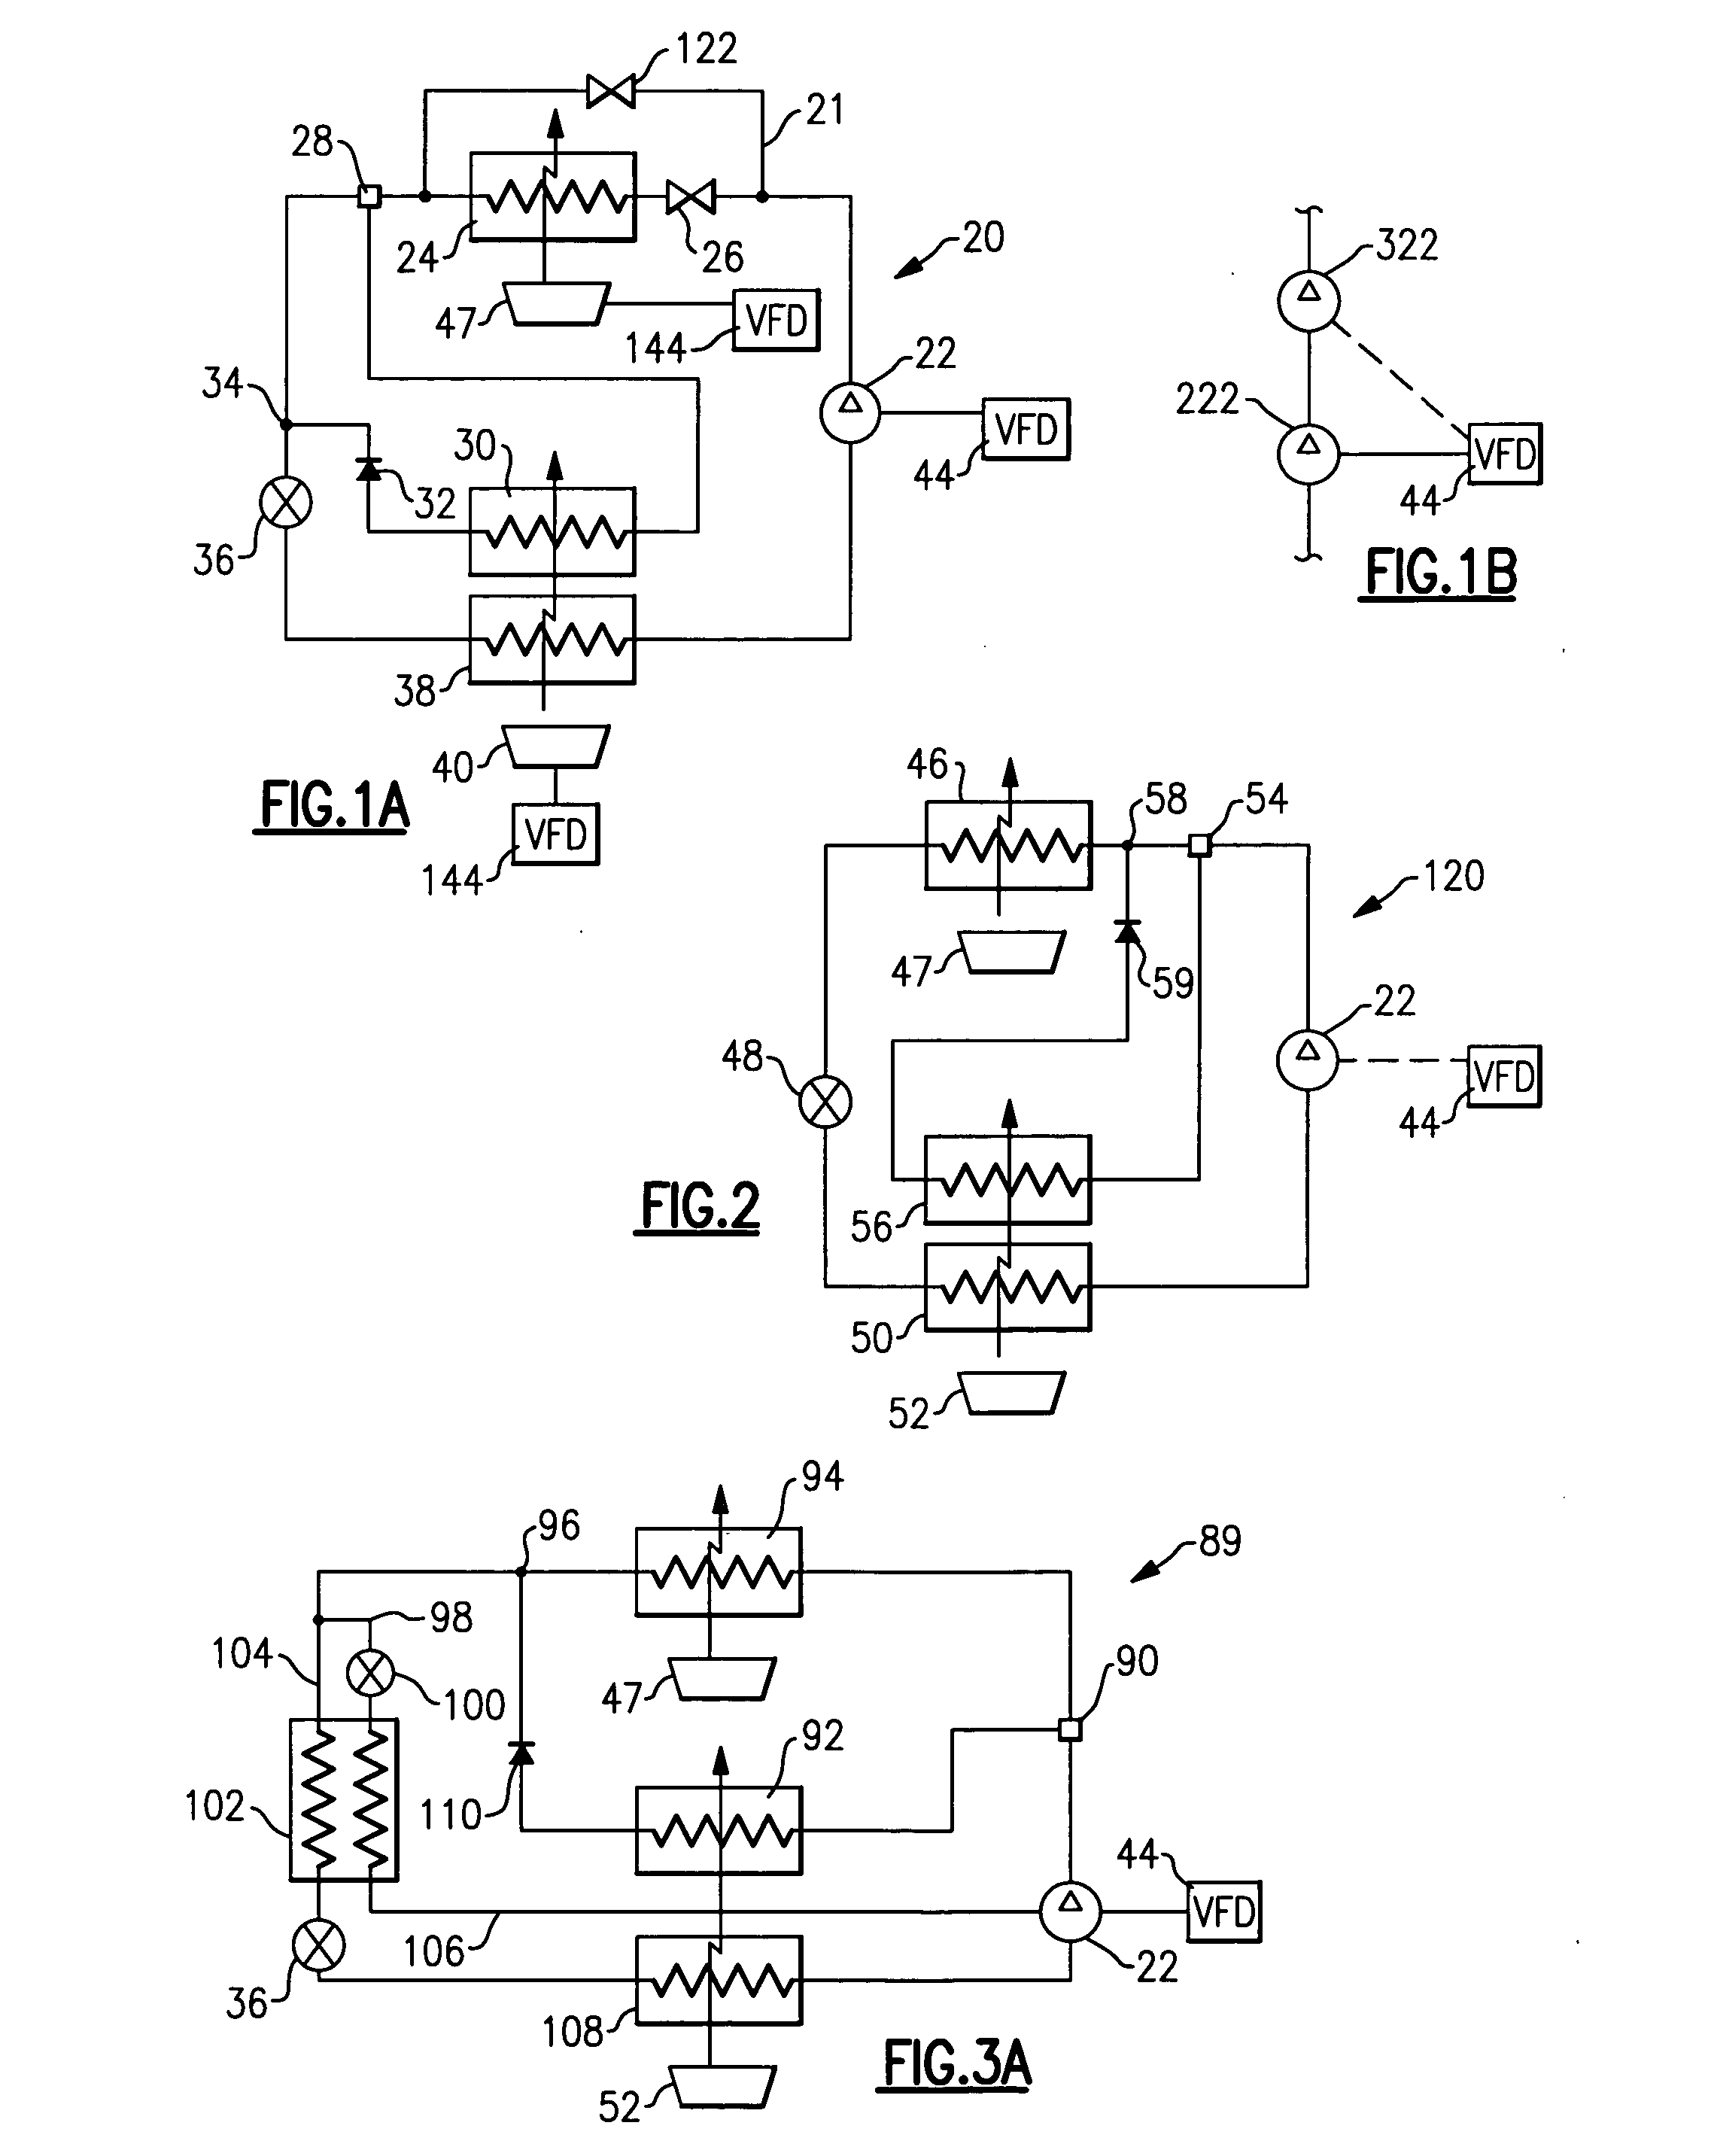 Refrigerant system with variable speed compressor and reheat function